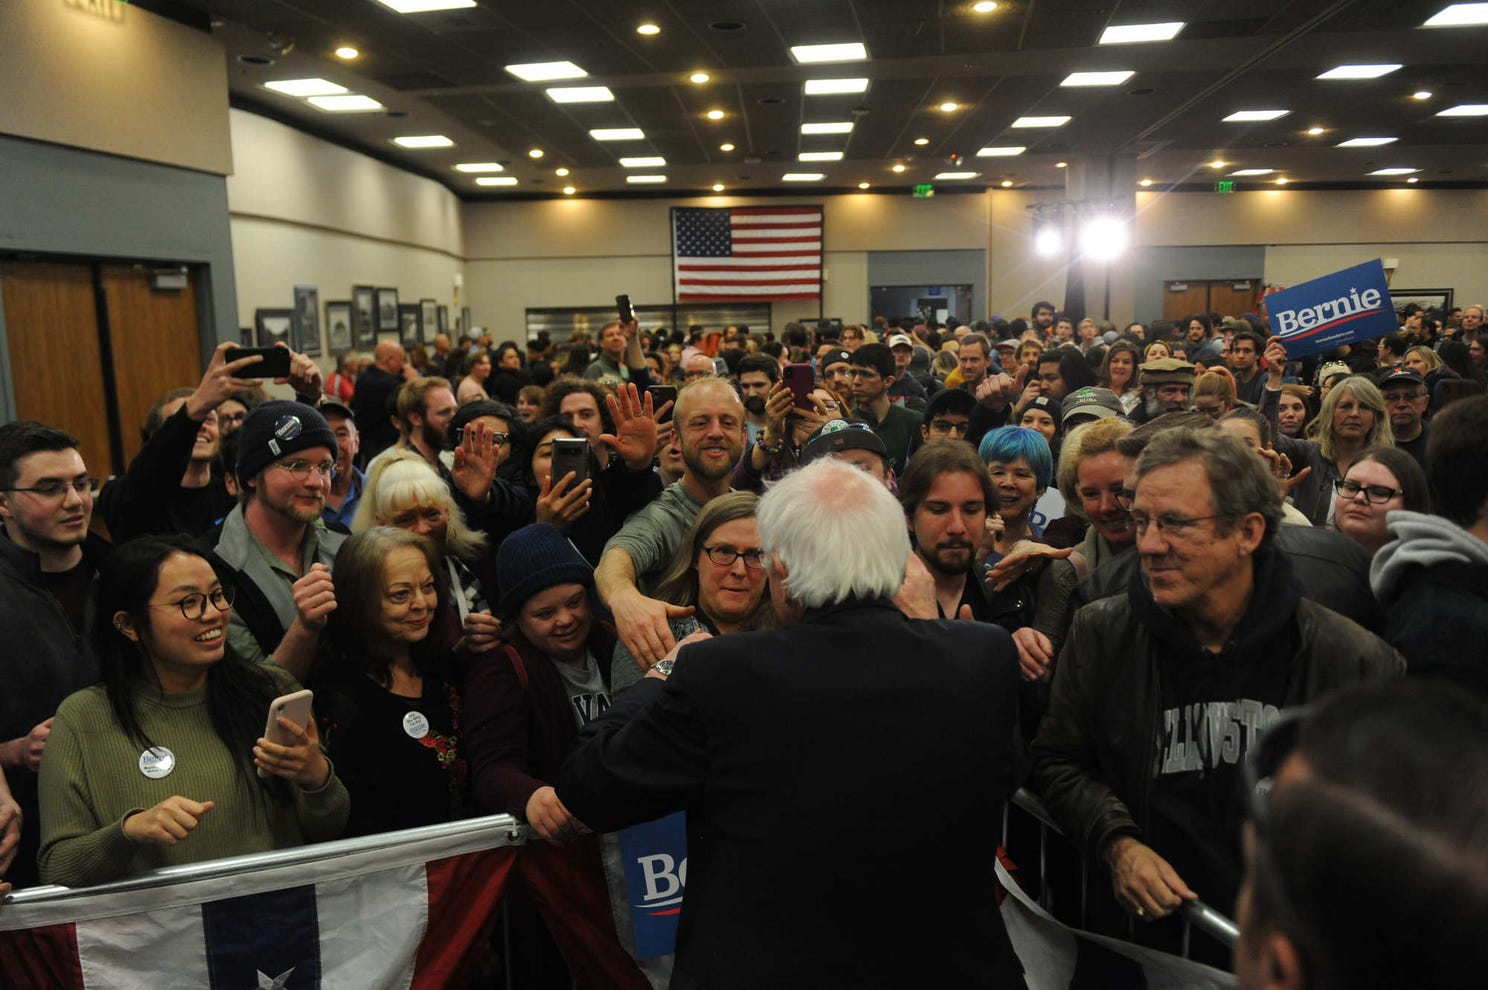 Democratic candidate for president Bernie Sanders campaigns at Lawlor Events Center in Reno on Feb. 18, 2020.